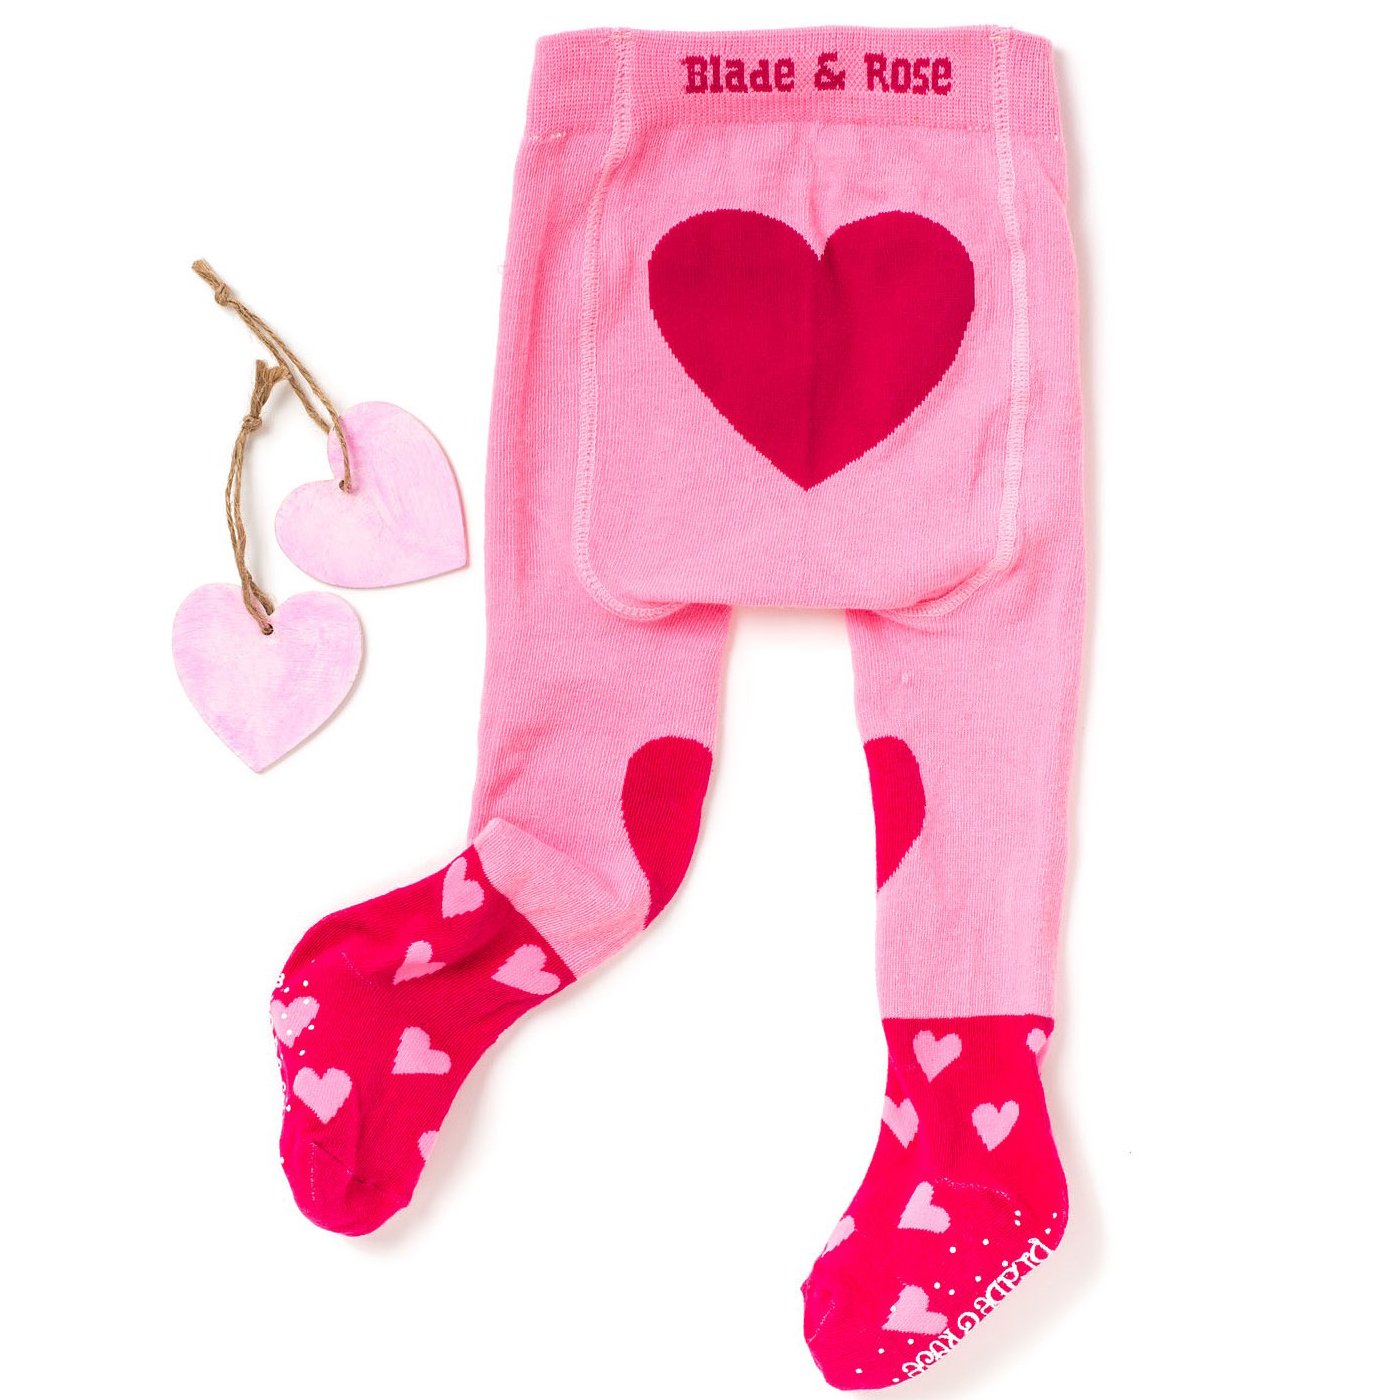 baby girl cotton tights